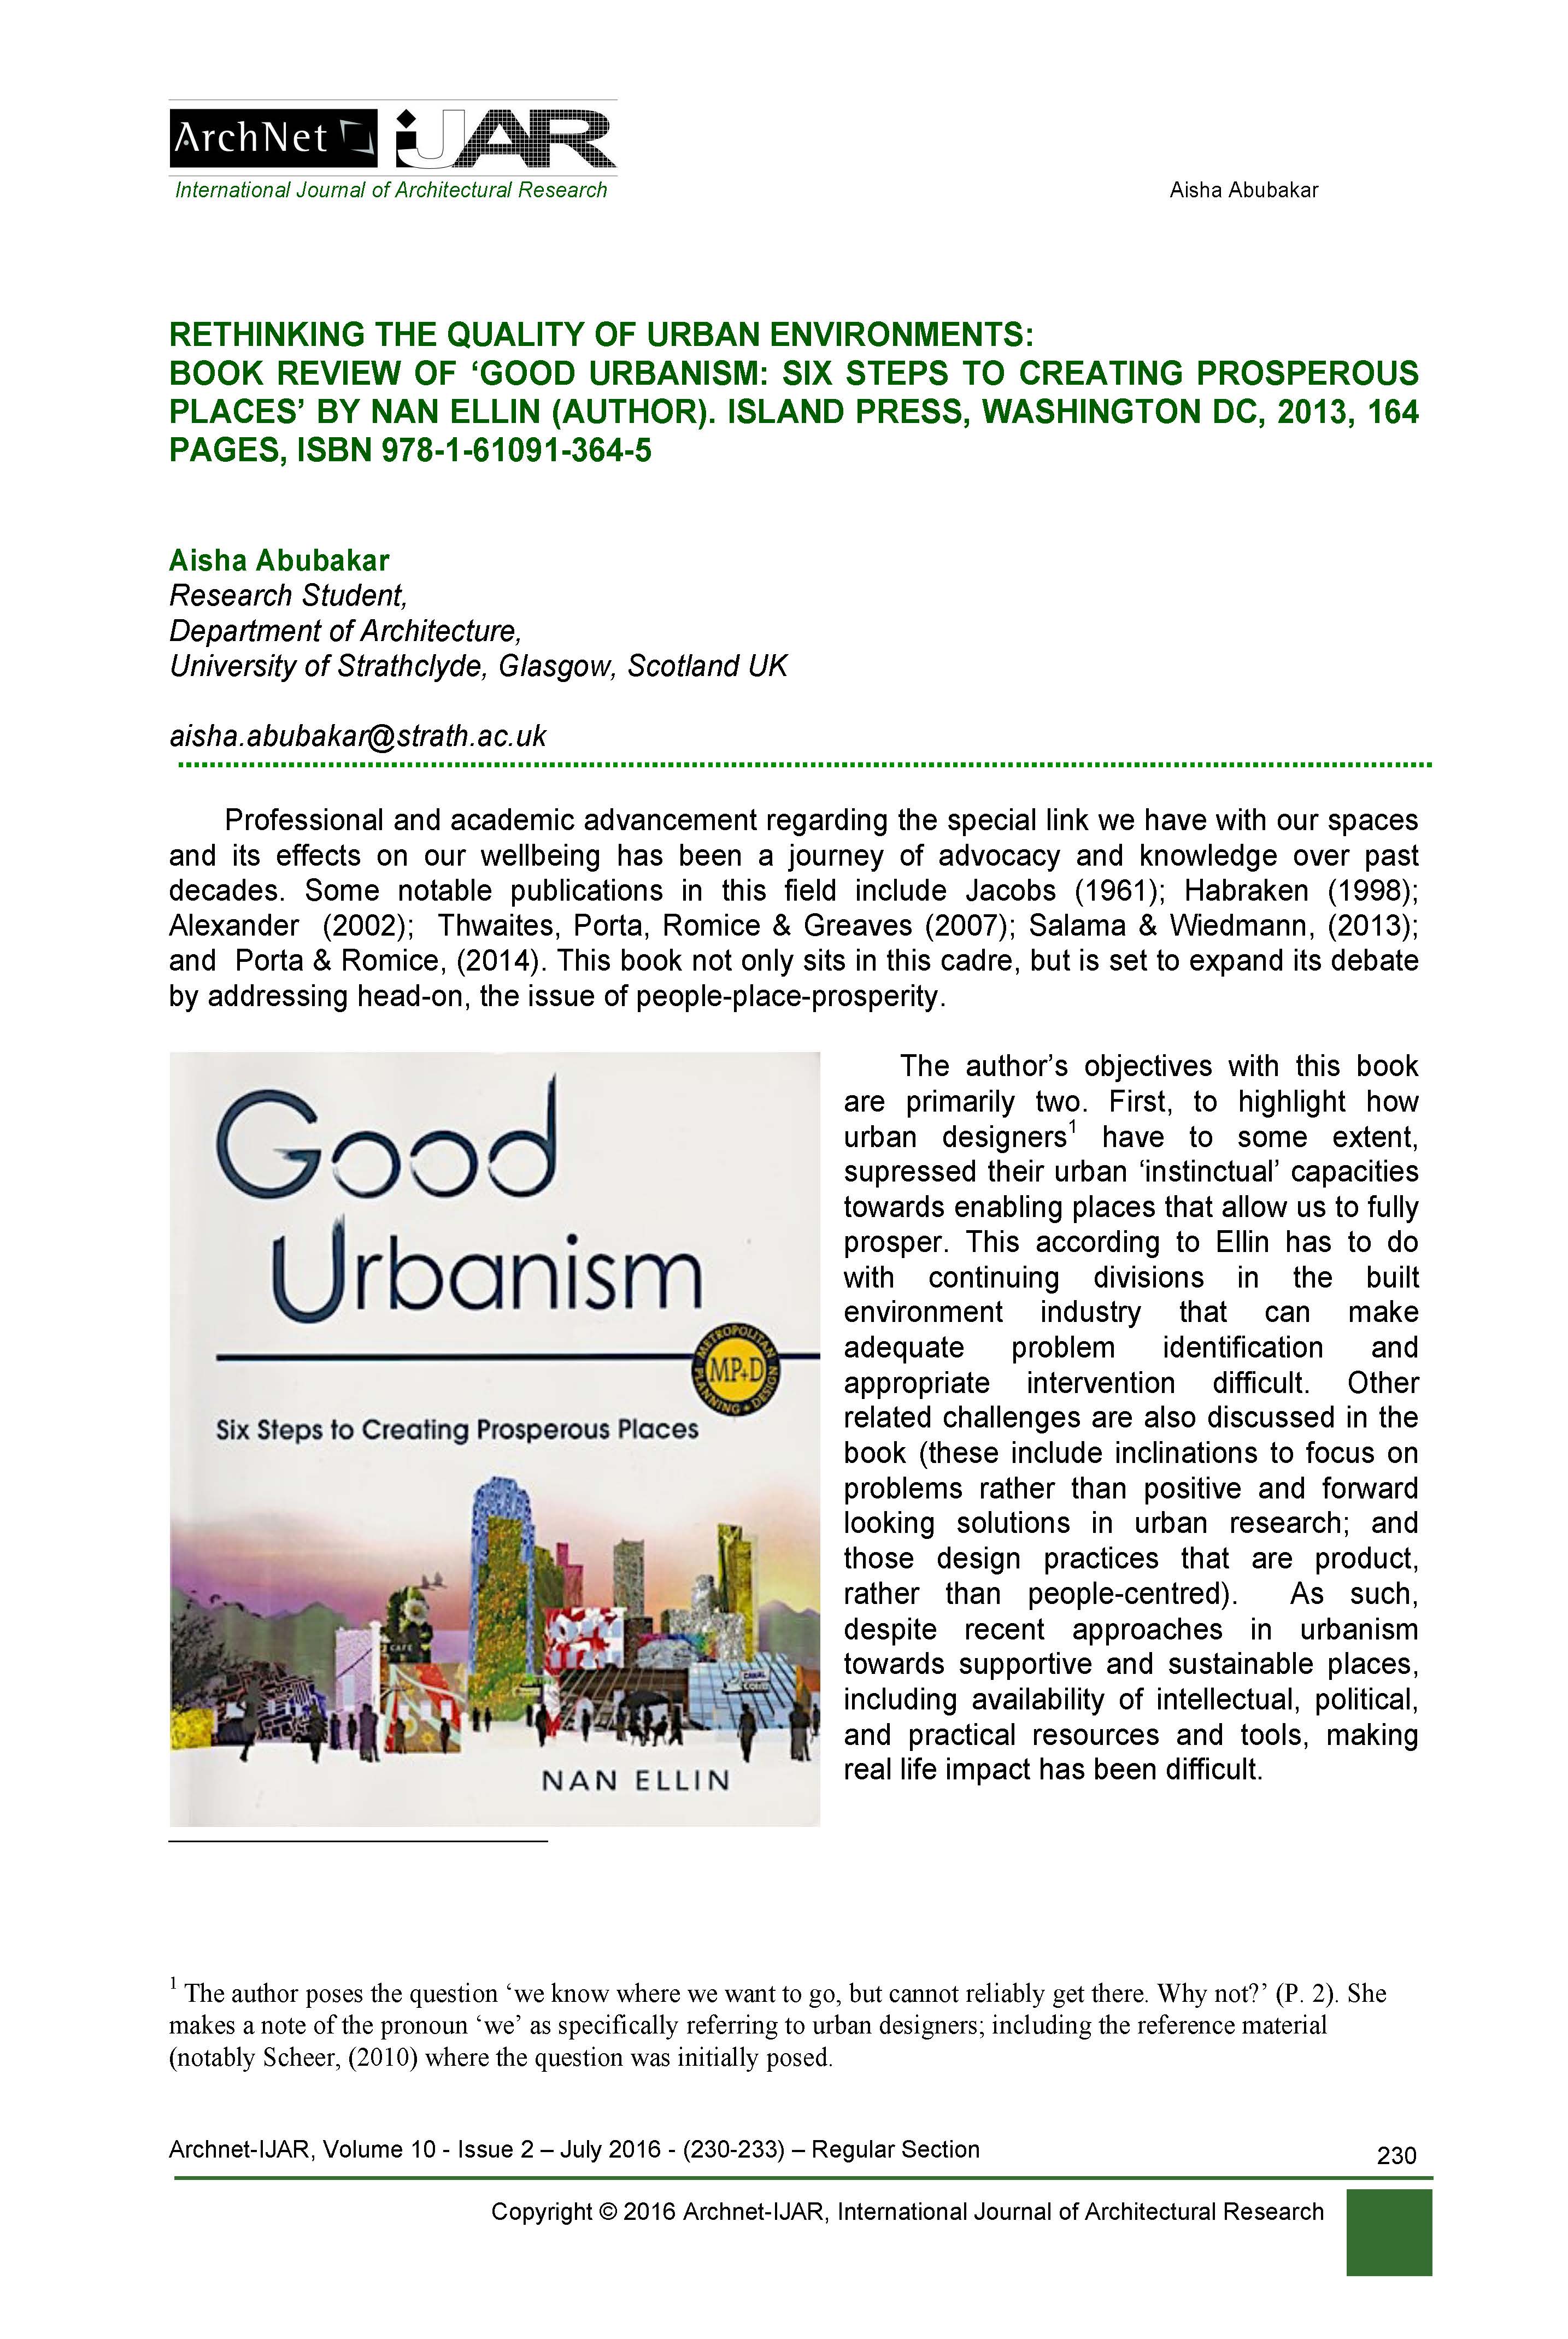 Rethinking the Quality of Urban Environments: Book Review of ‘good Urbanism: Six Steps to Creating Prosperous Places’ by Nan Ellin